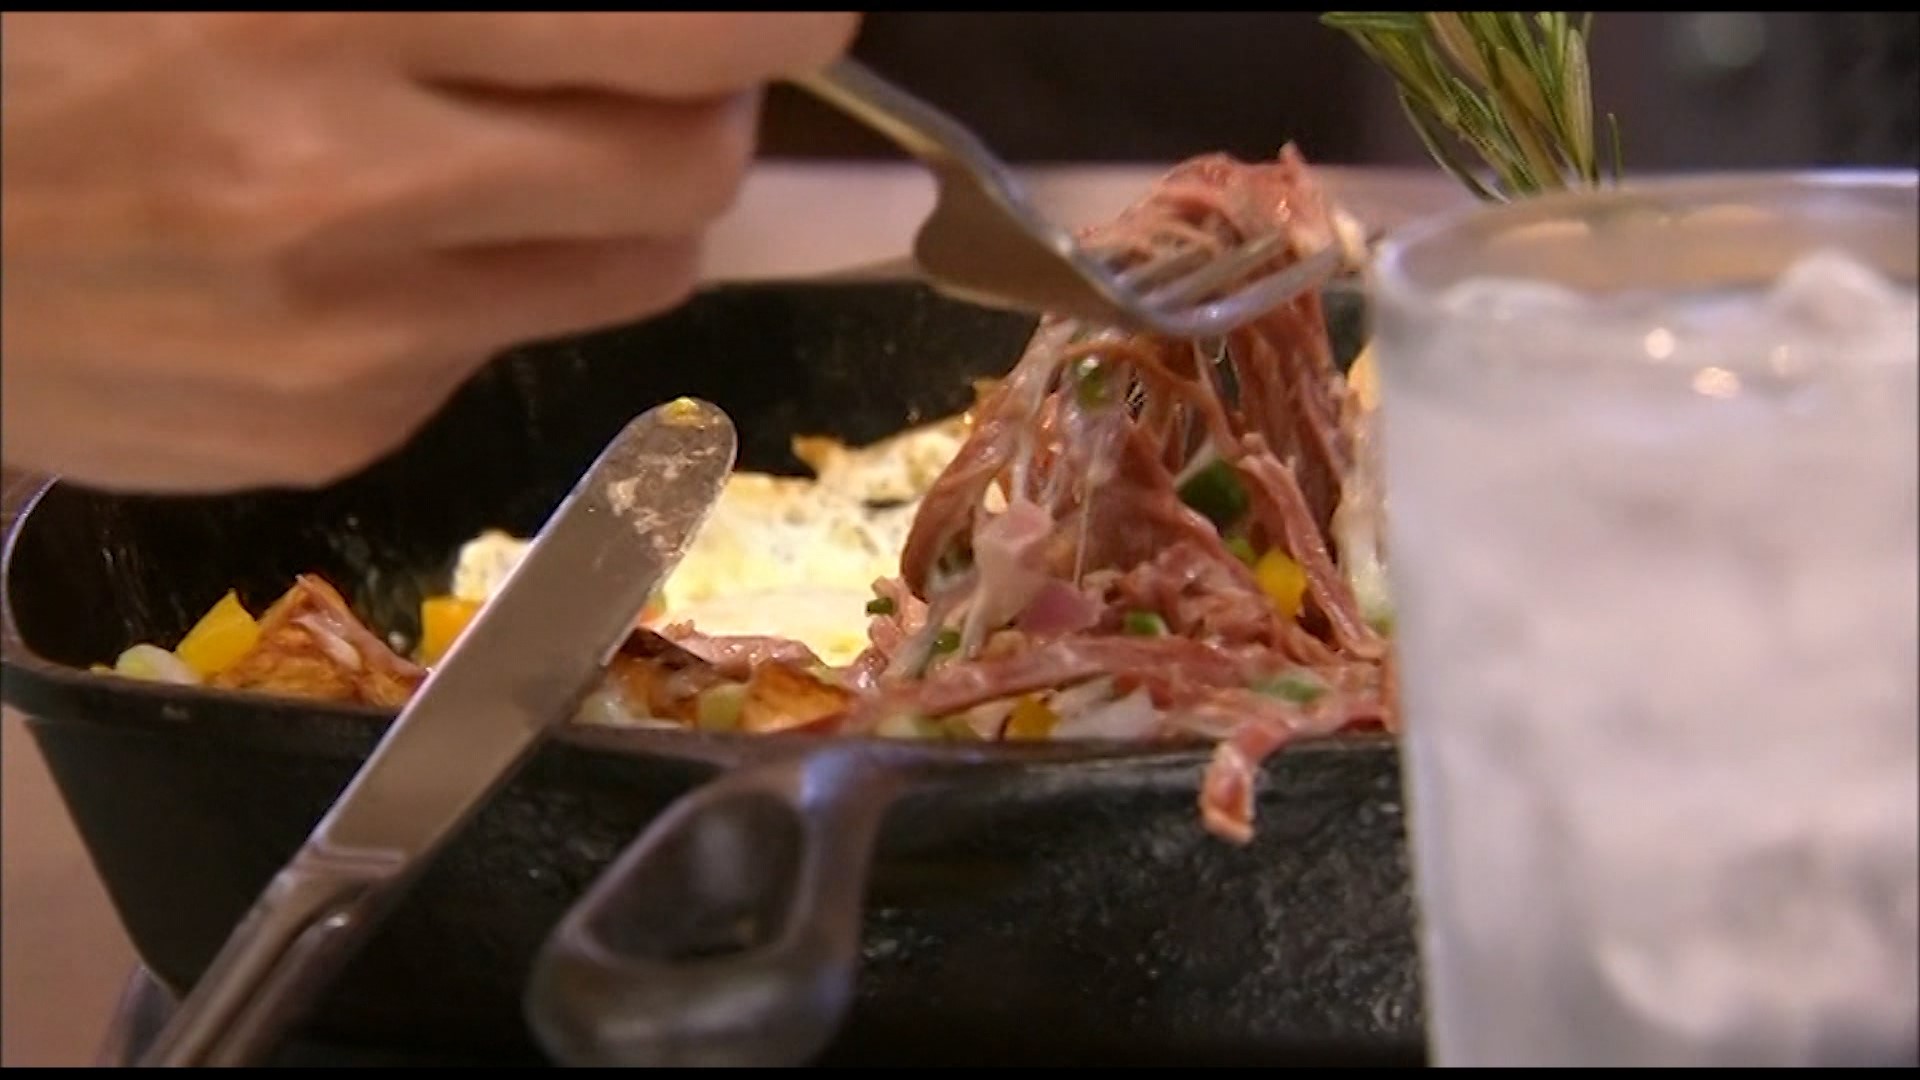 WATCH: Millennials eating to cope with stress